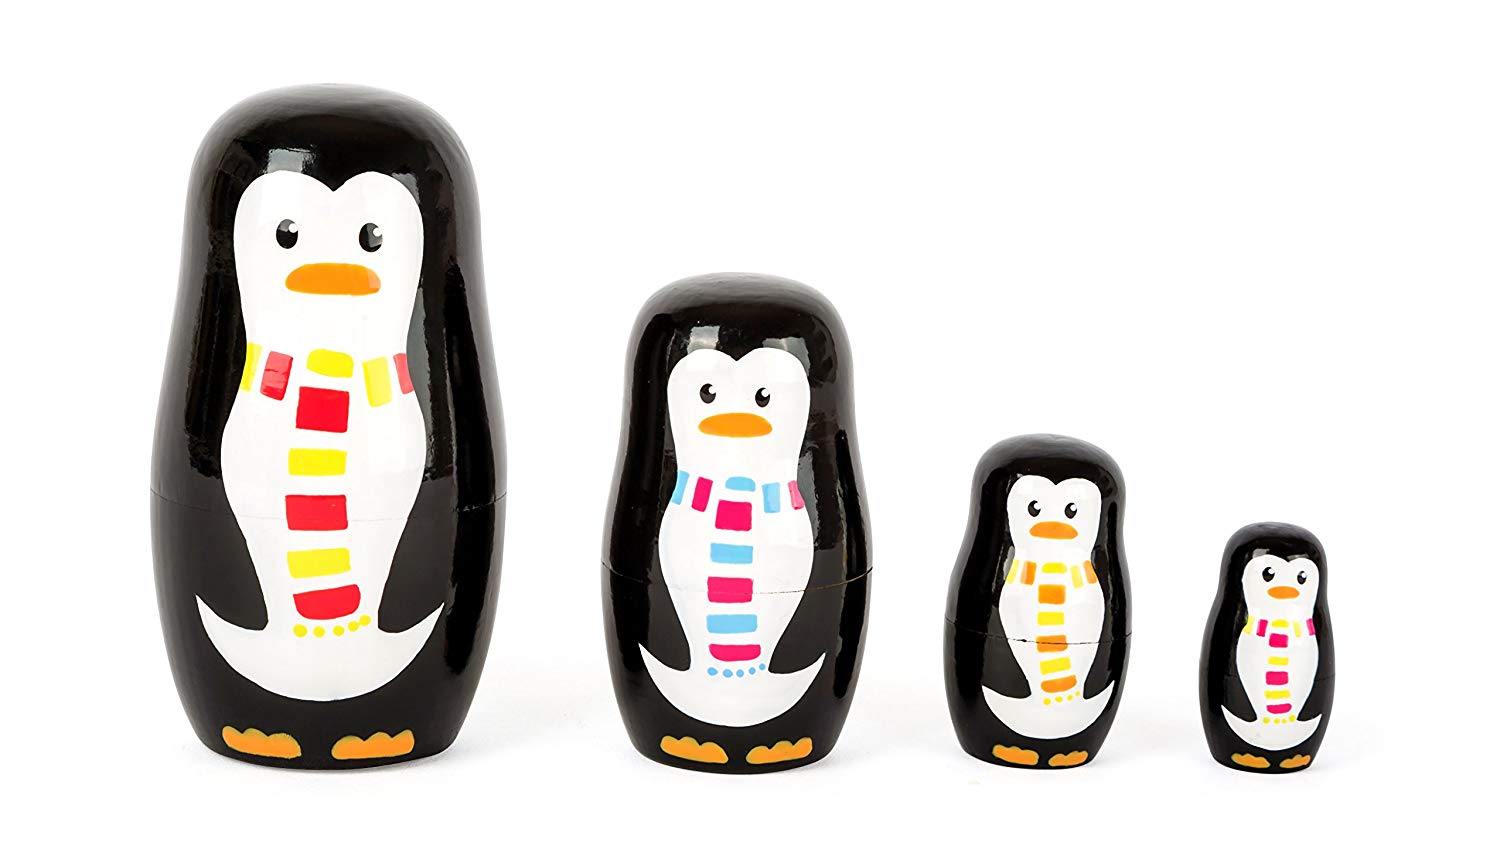 Small Foot by Legler Small Foot Penguin Figures Wooden Russian Nesting Dolls In Four Different S